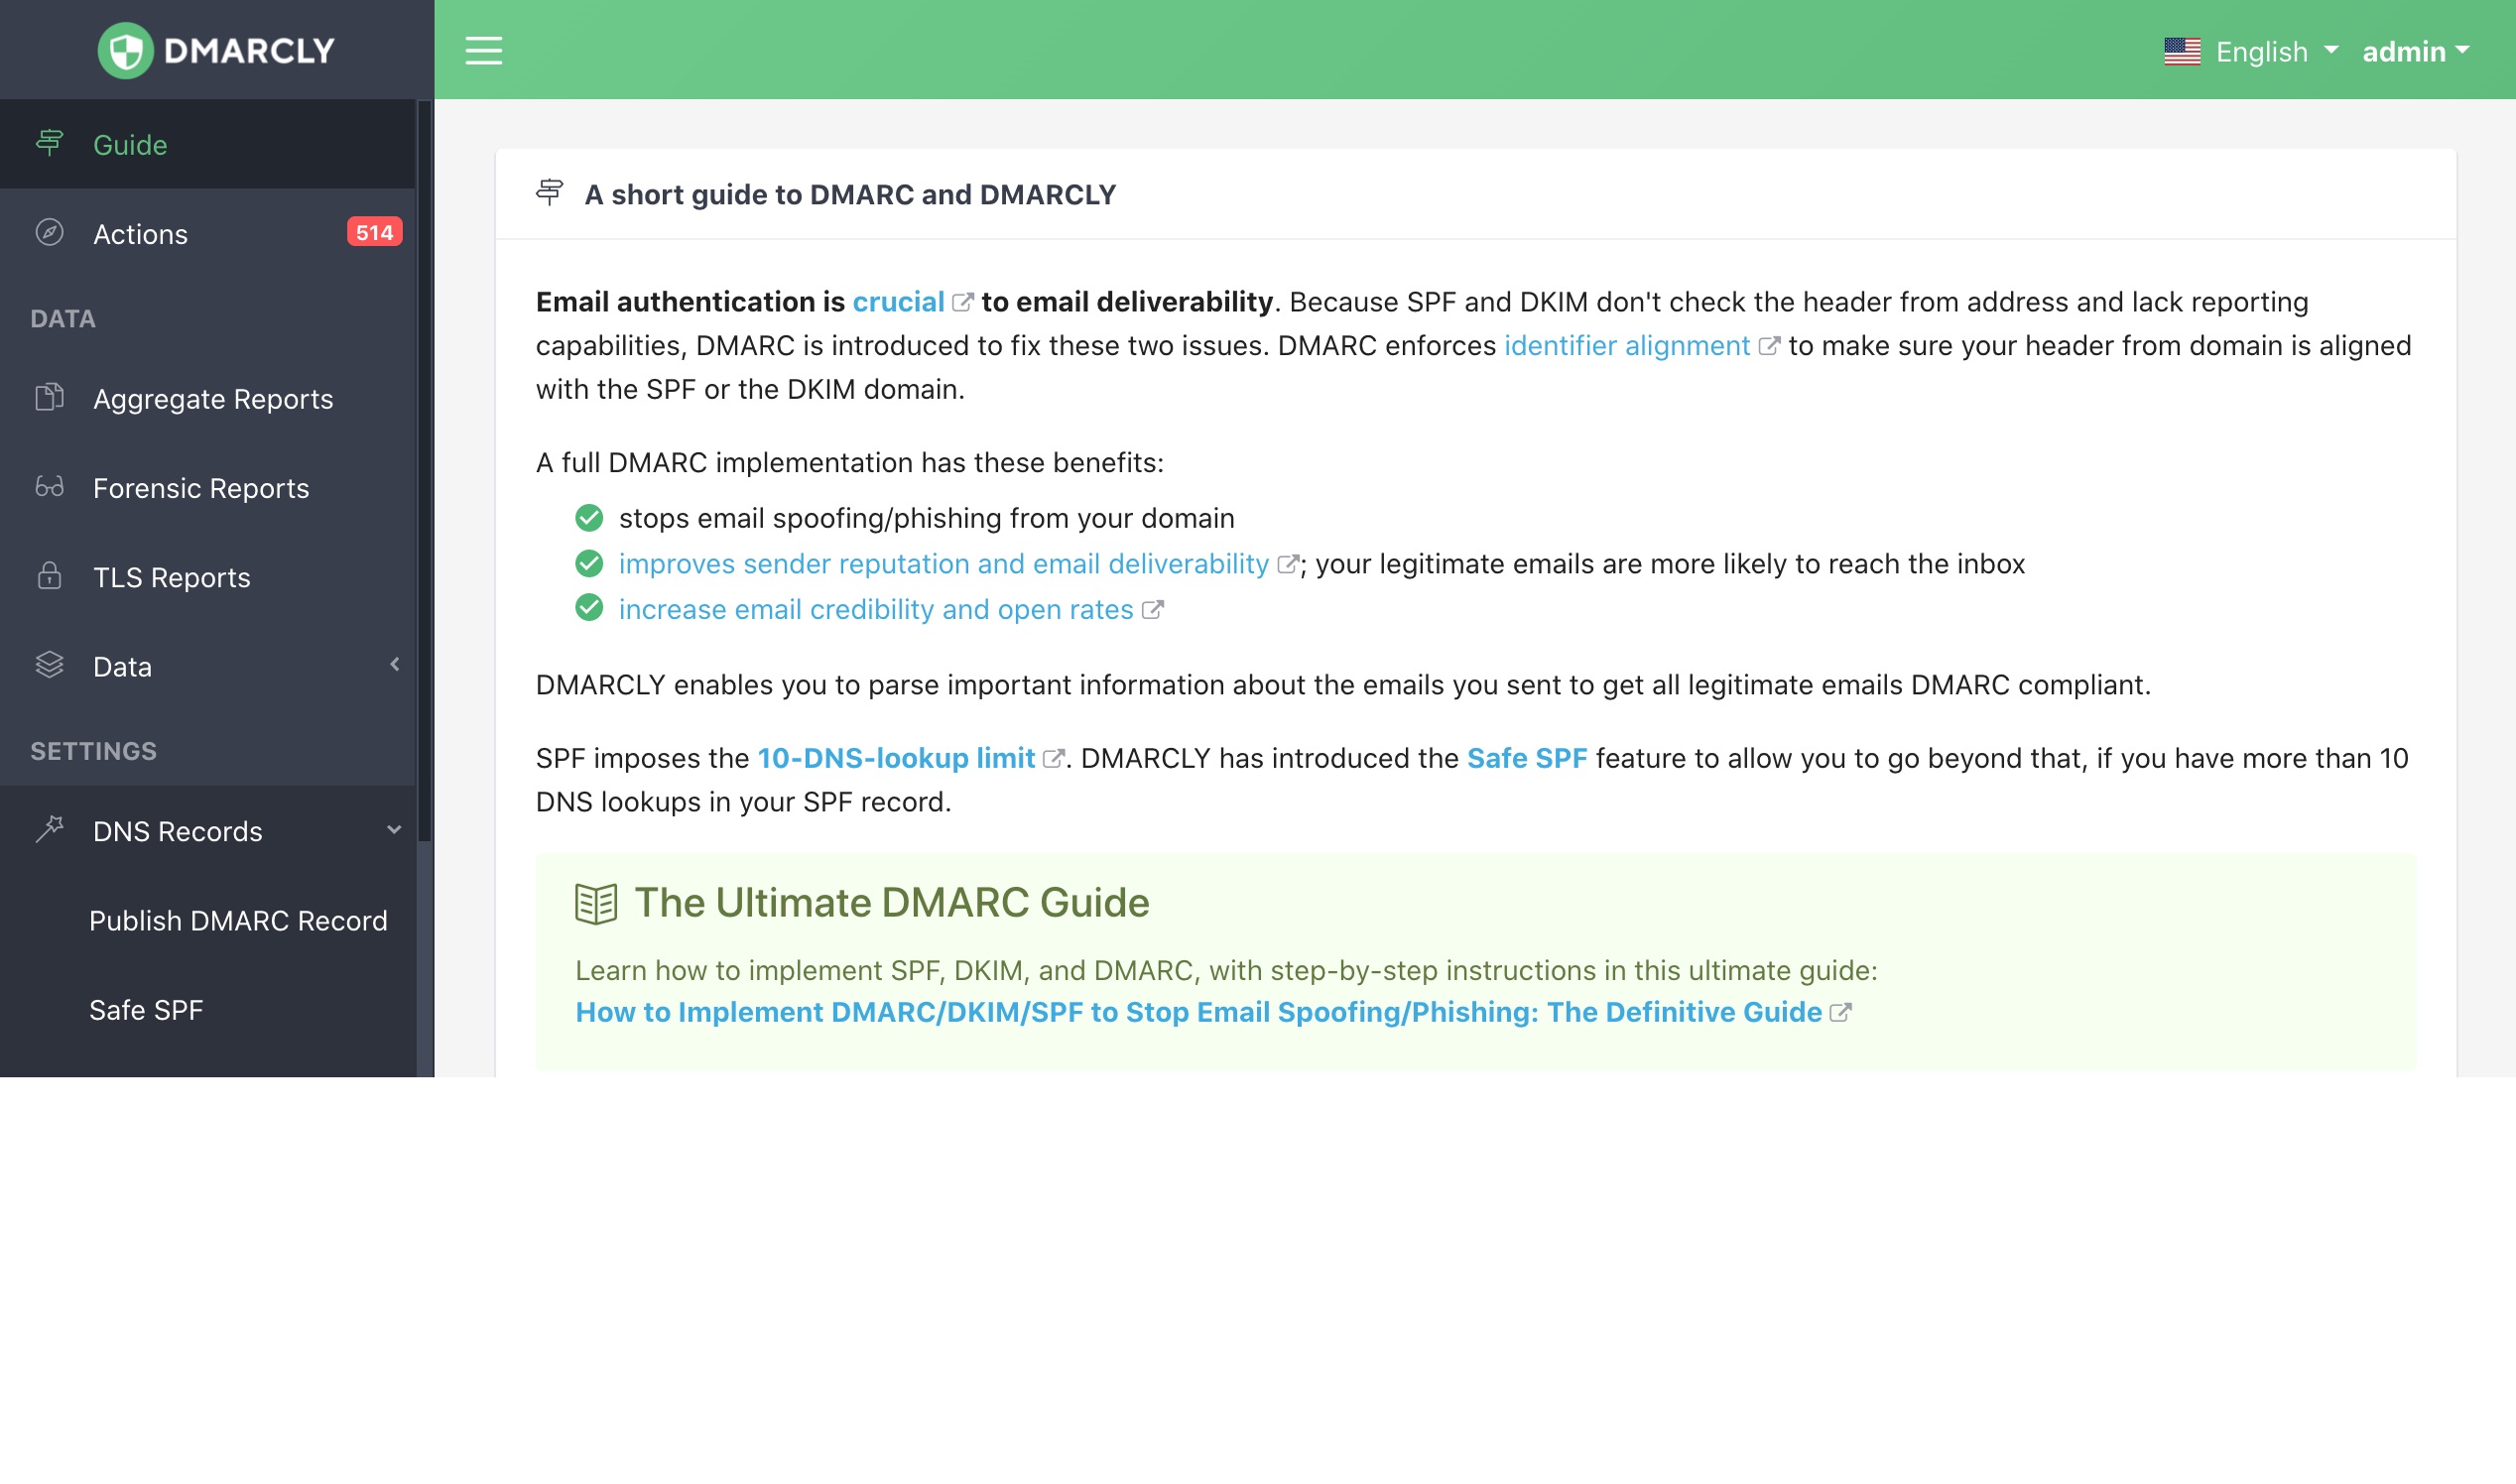 Find detailed information about DMARCLY